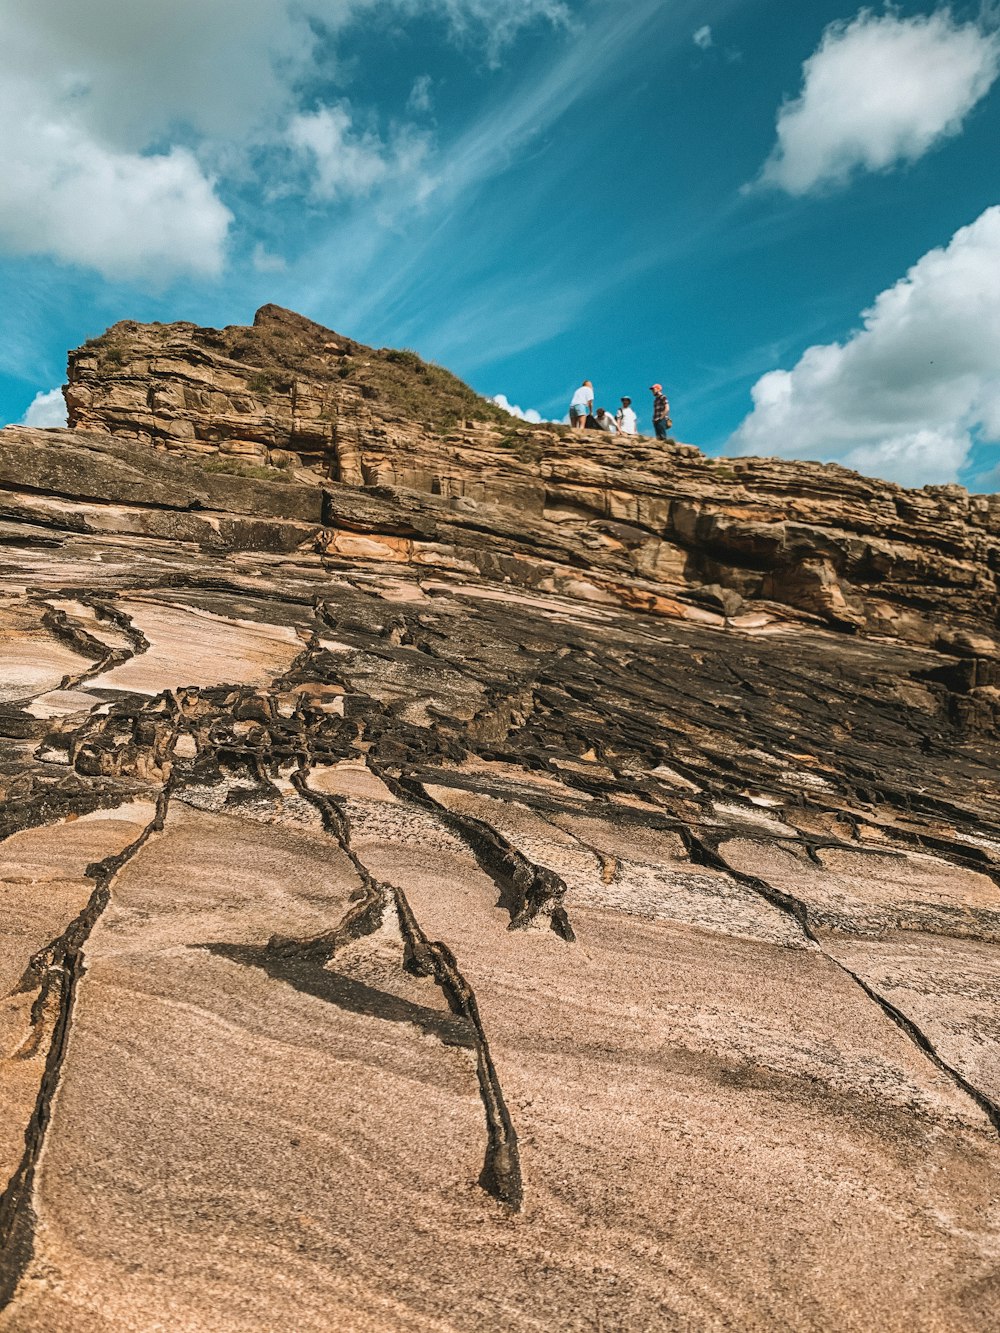 people climbing on brown rocky mountain under blue and white sunny cloudy sky during daytime